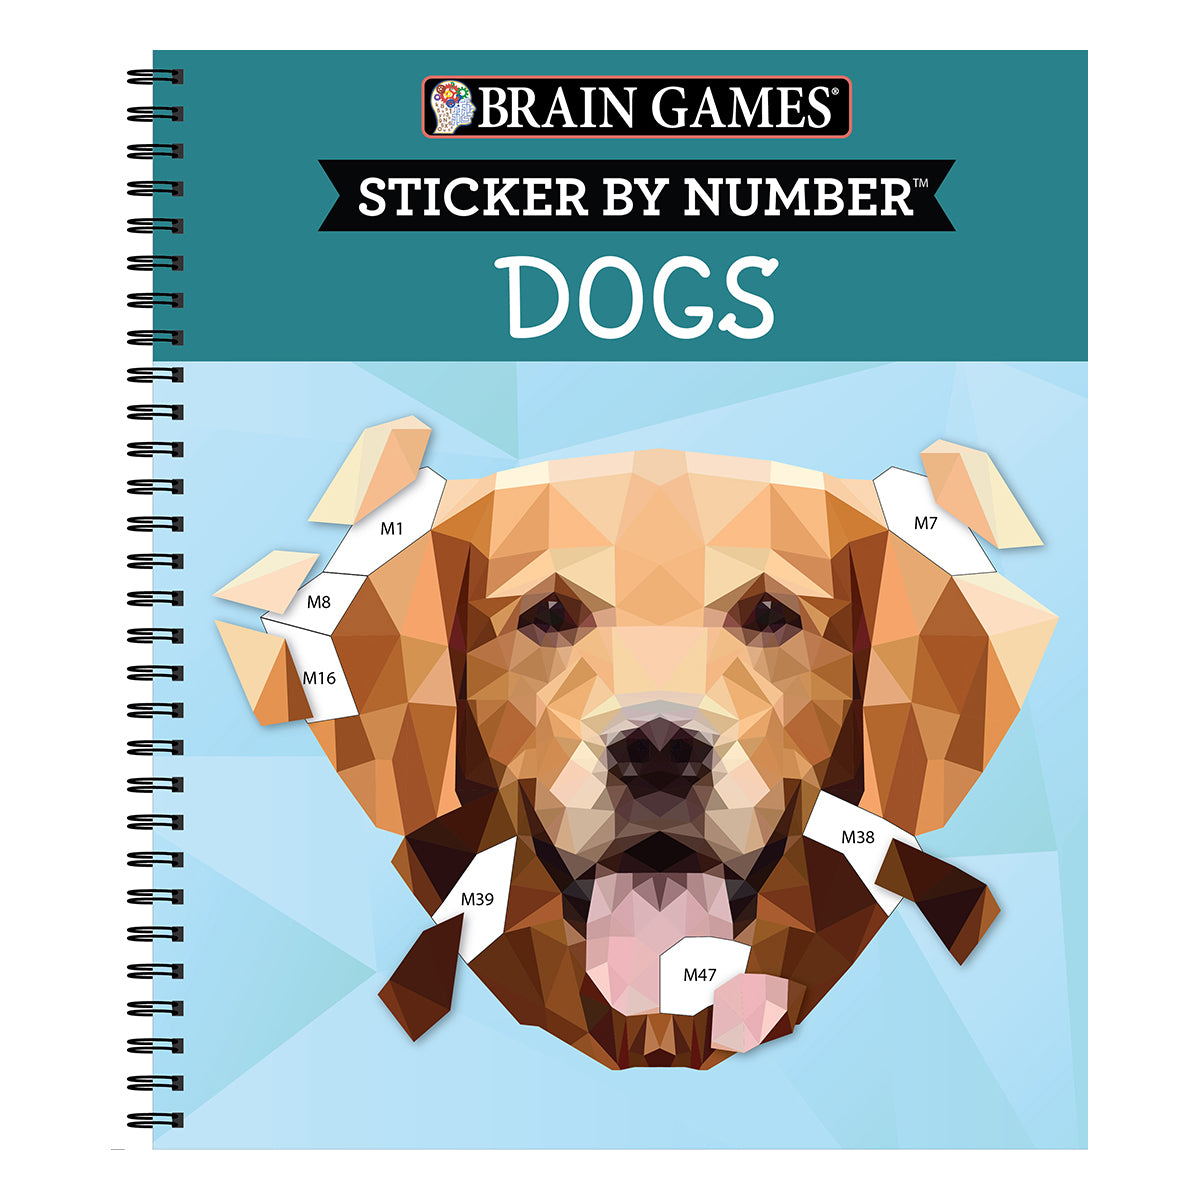 Brain Games Sticker by Number Dogs 28 Images to Sticker – pilbooks